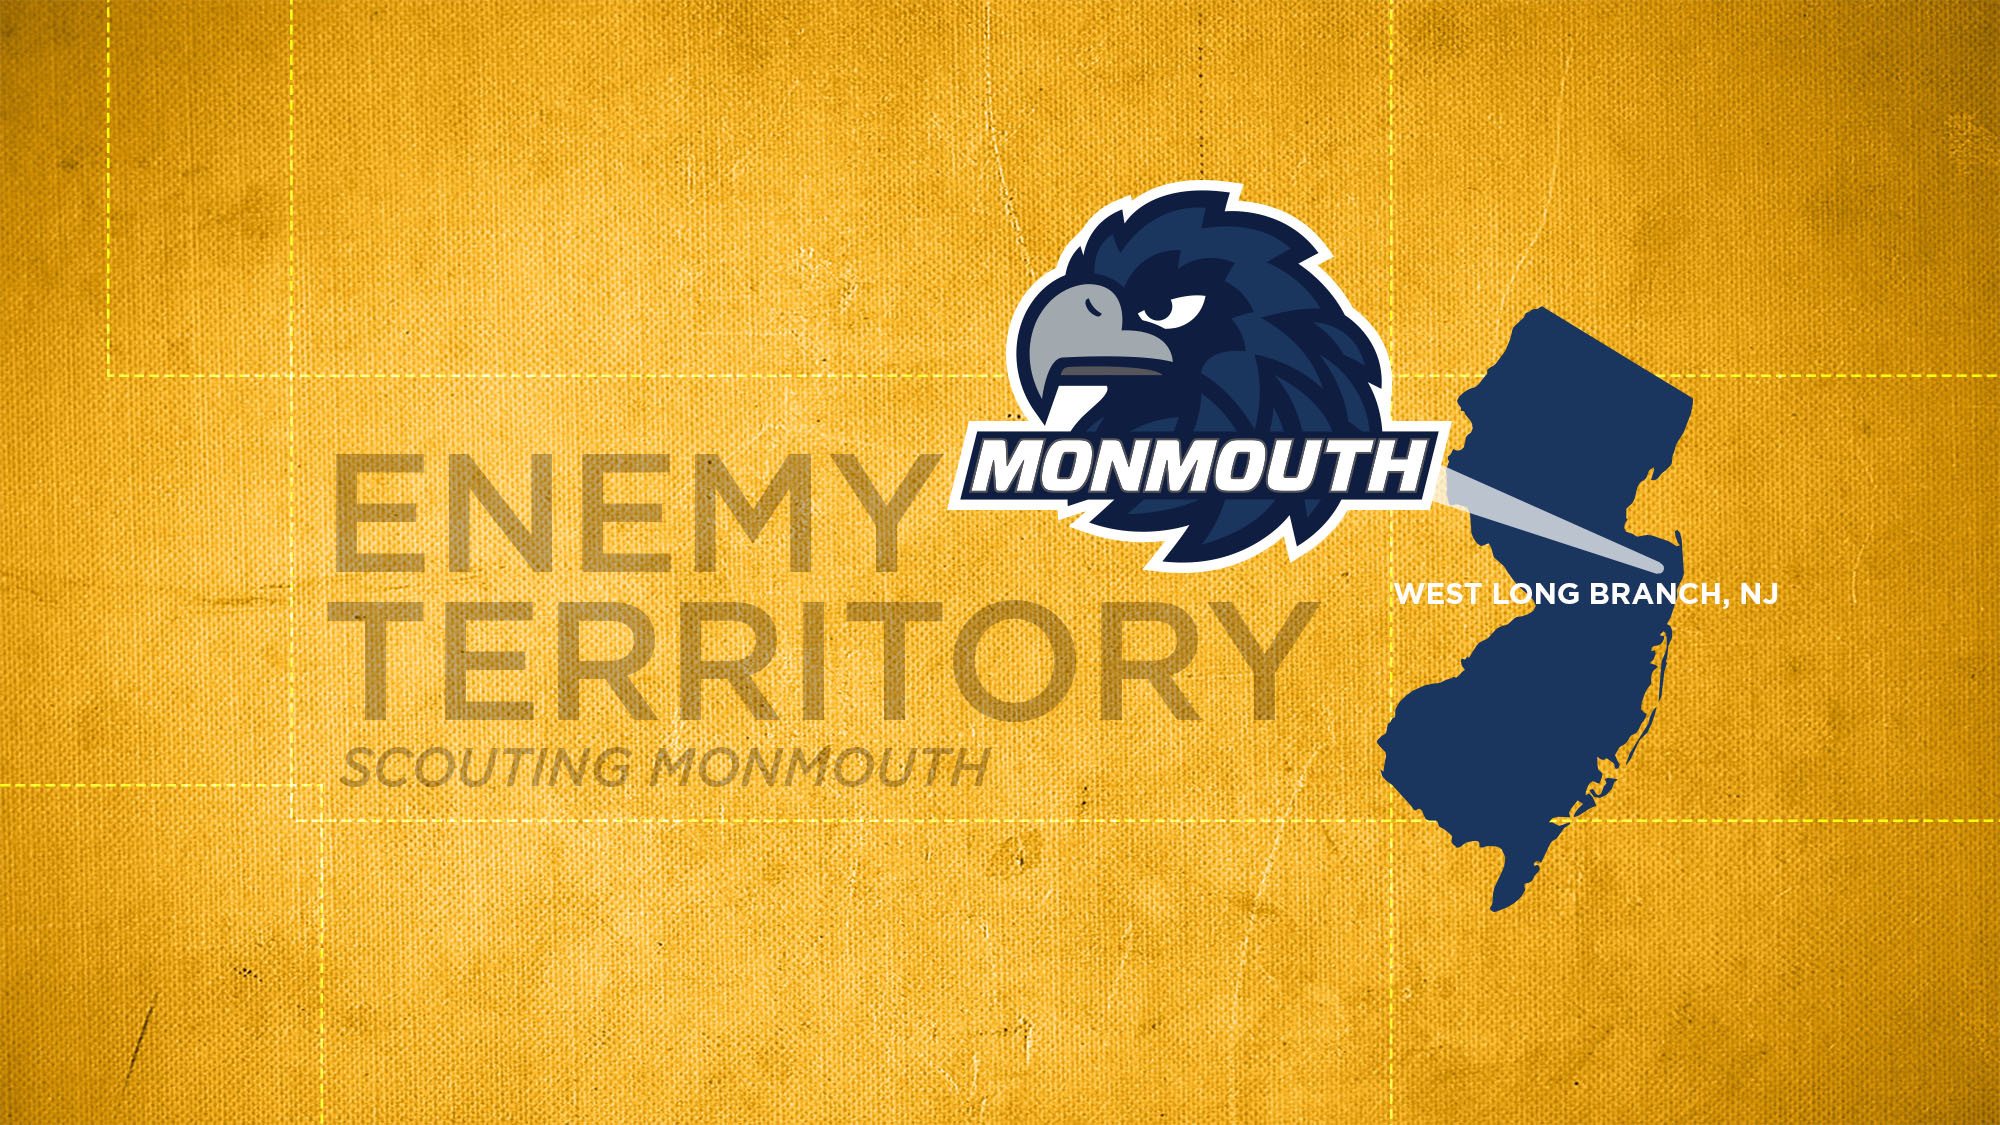 2000x1125 ENEMY TERRITORY: Monmouth